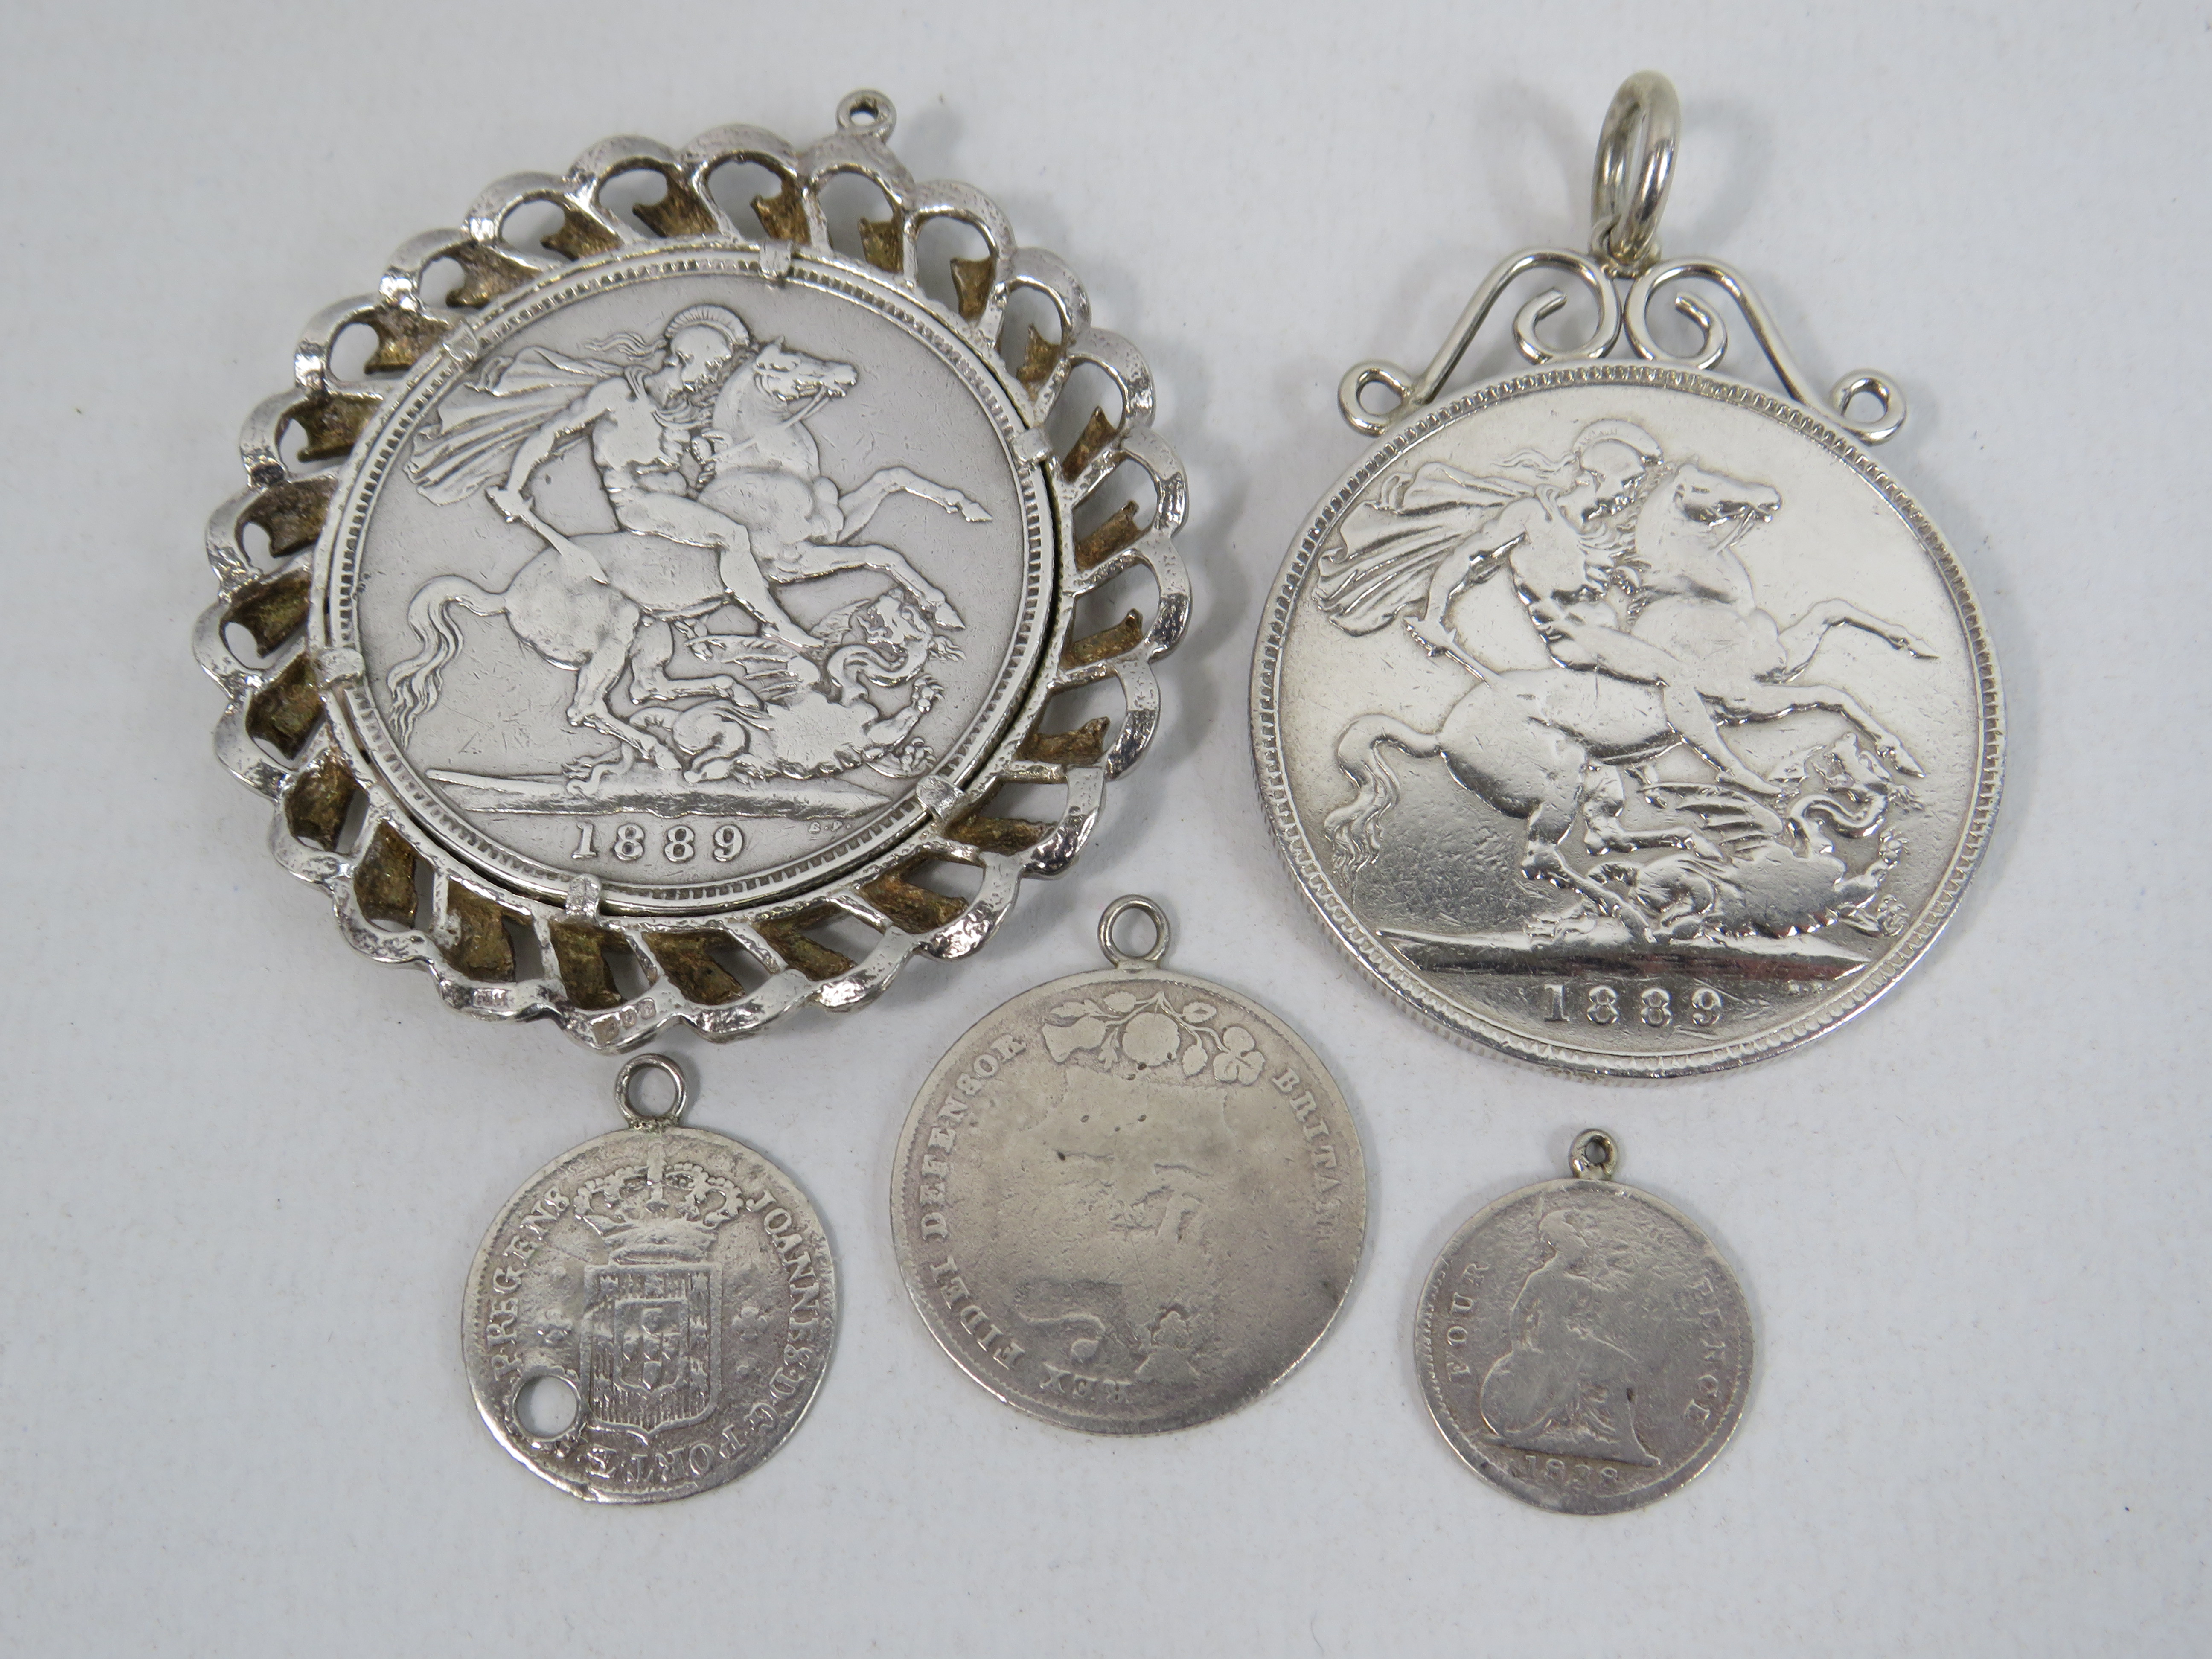 2 Mounted 1899 Queen Victoria silver Crowns plus 3 small silver coin pendants. Total weight 80.4